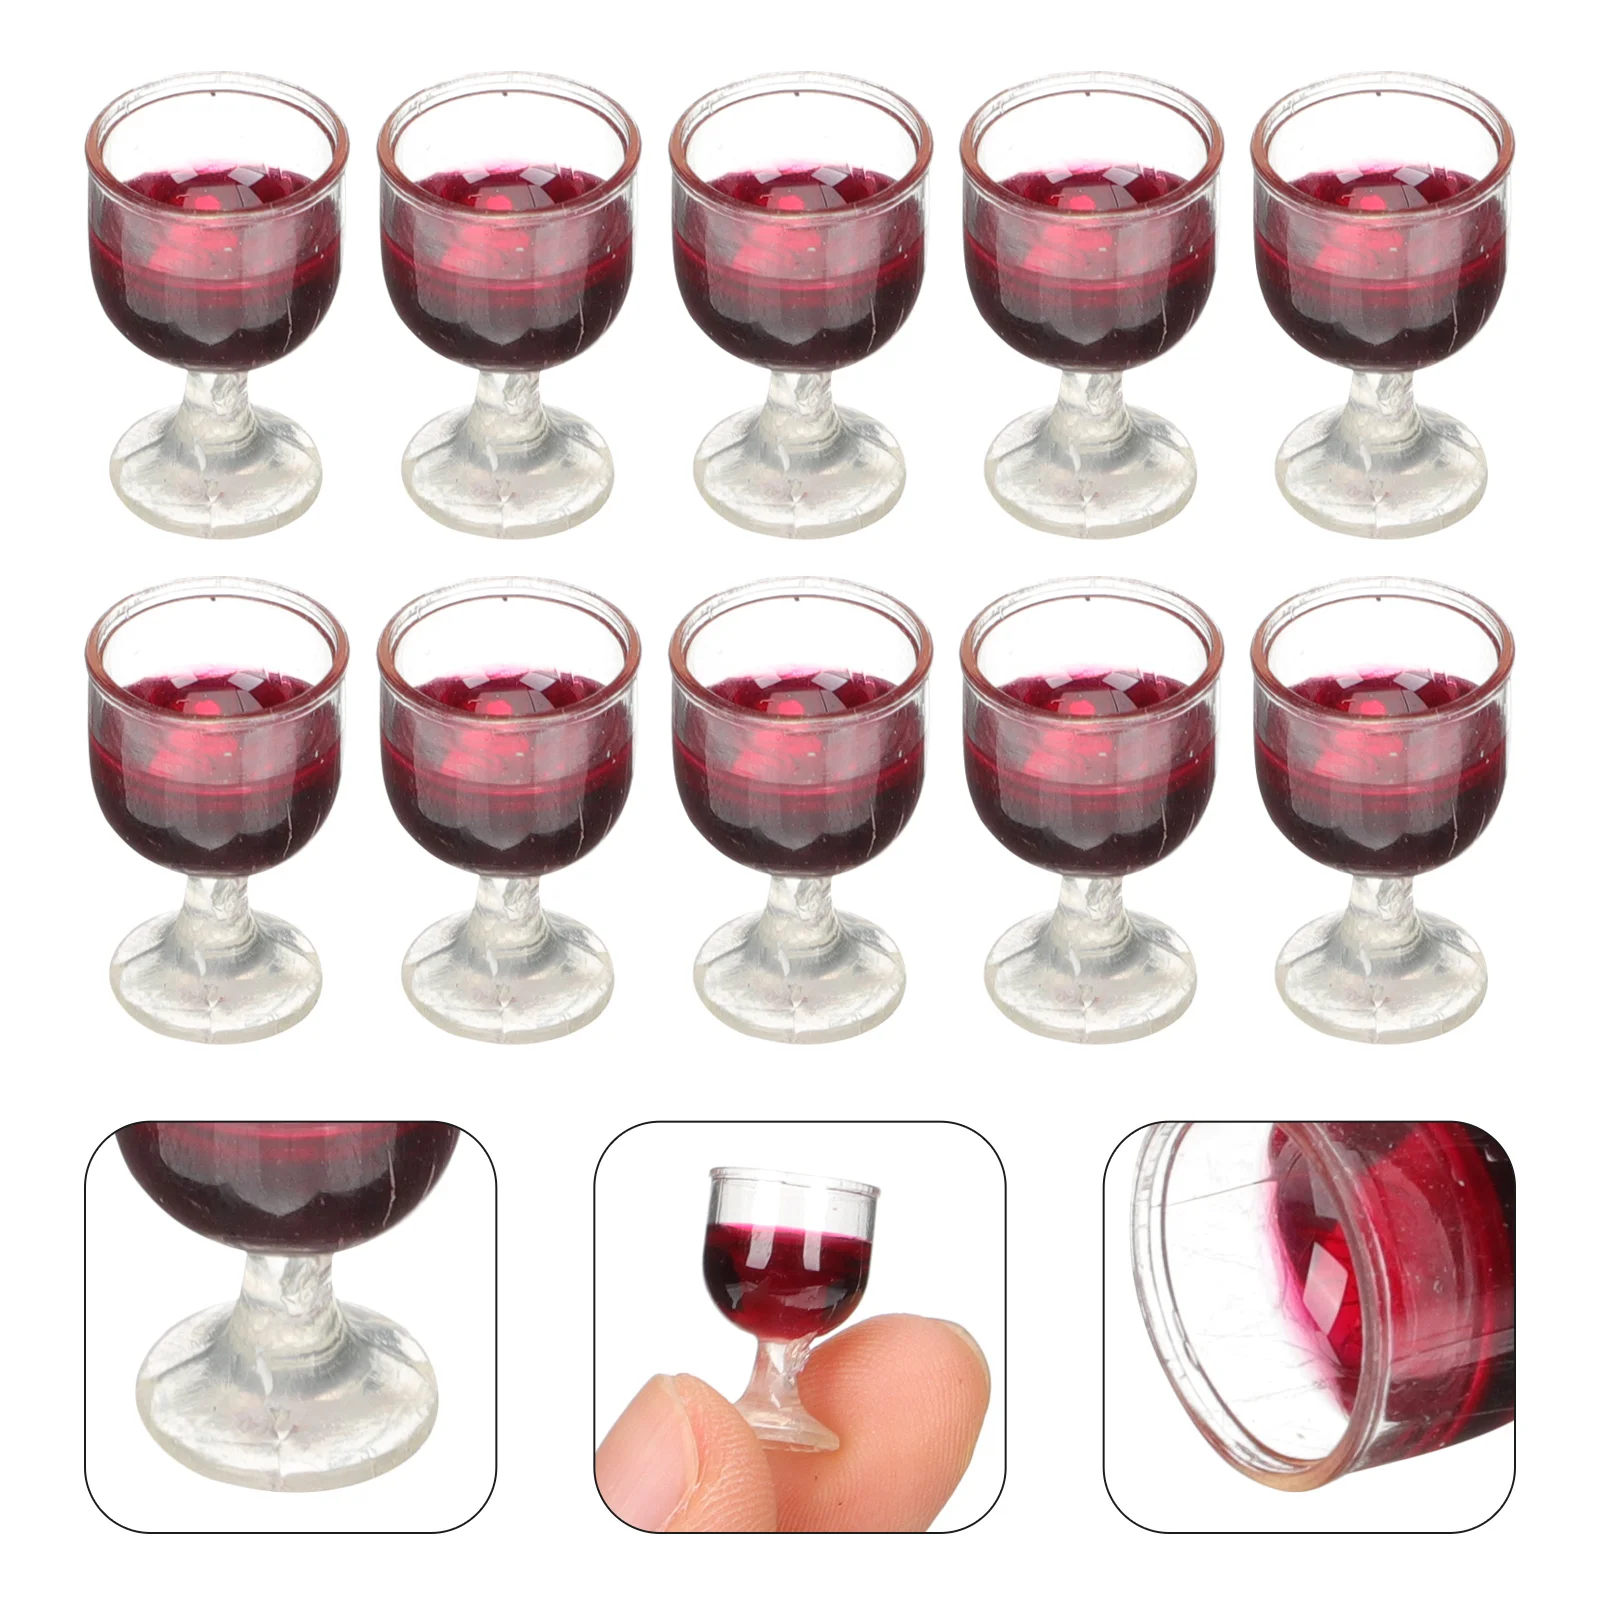 10 Pcs Glassess Dollhouse Glass Miniature Decoration Accessories Micro Food Play Props Decorative Tiny Dolly Glasses